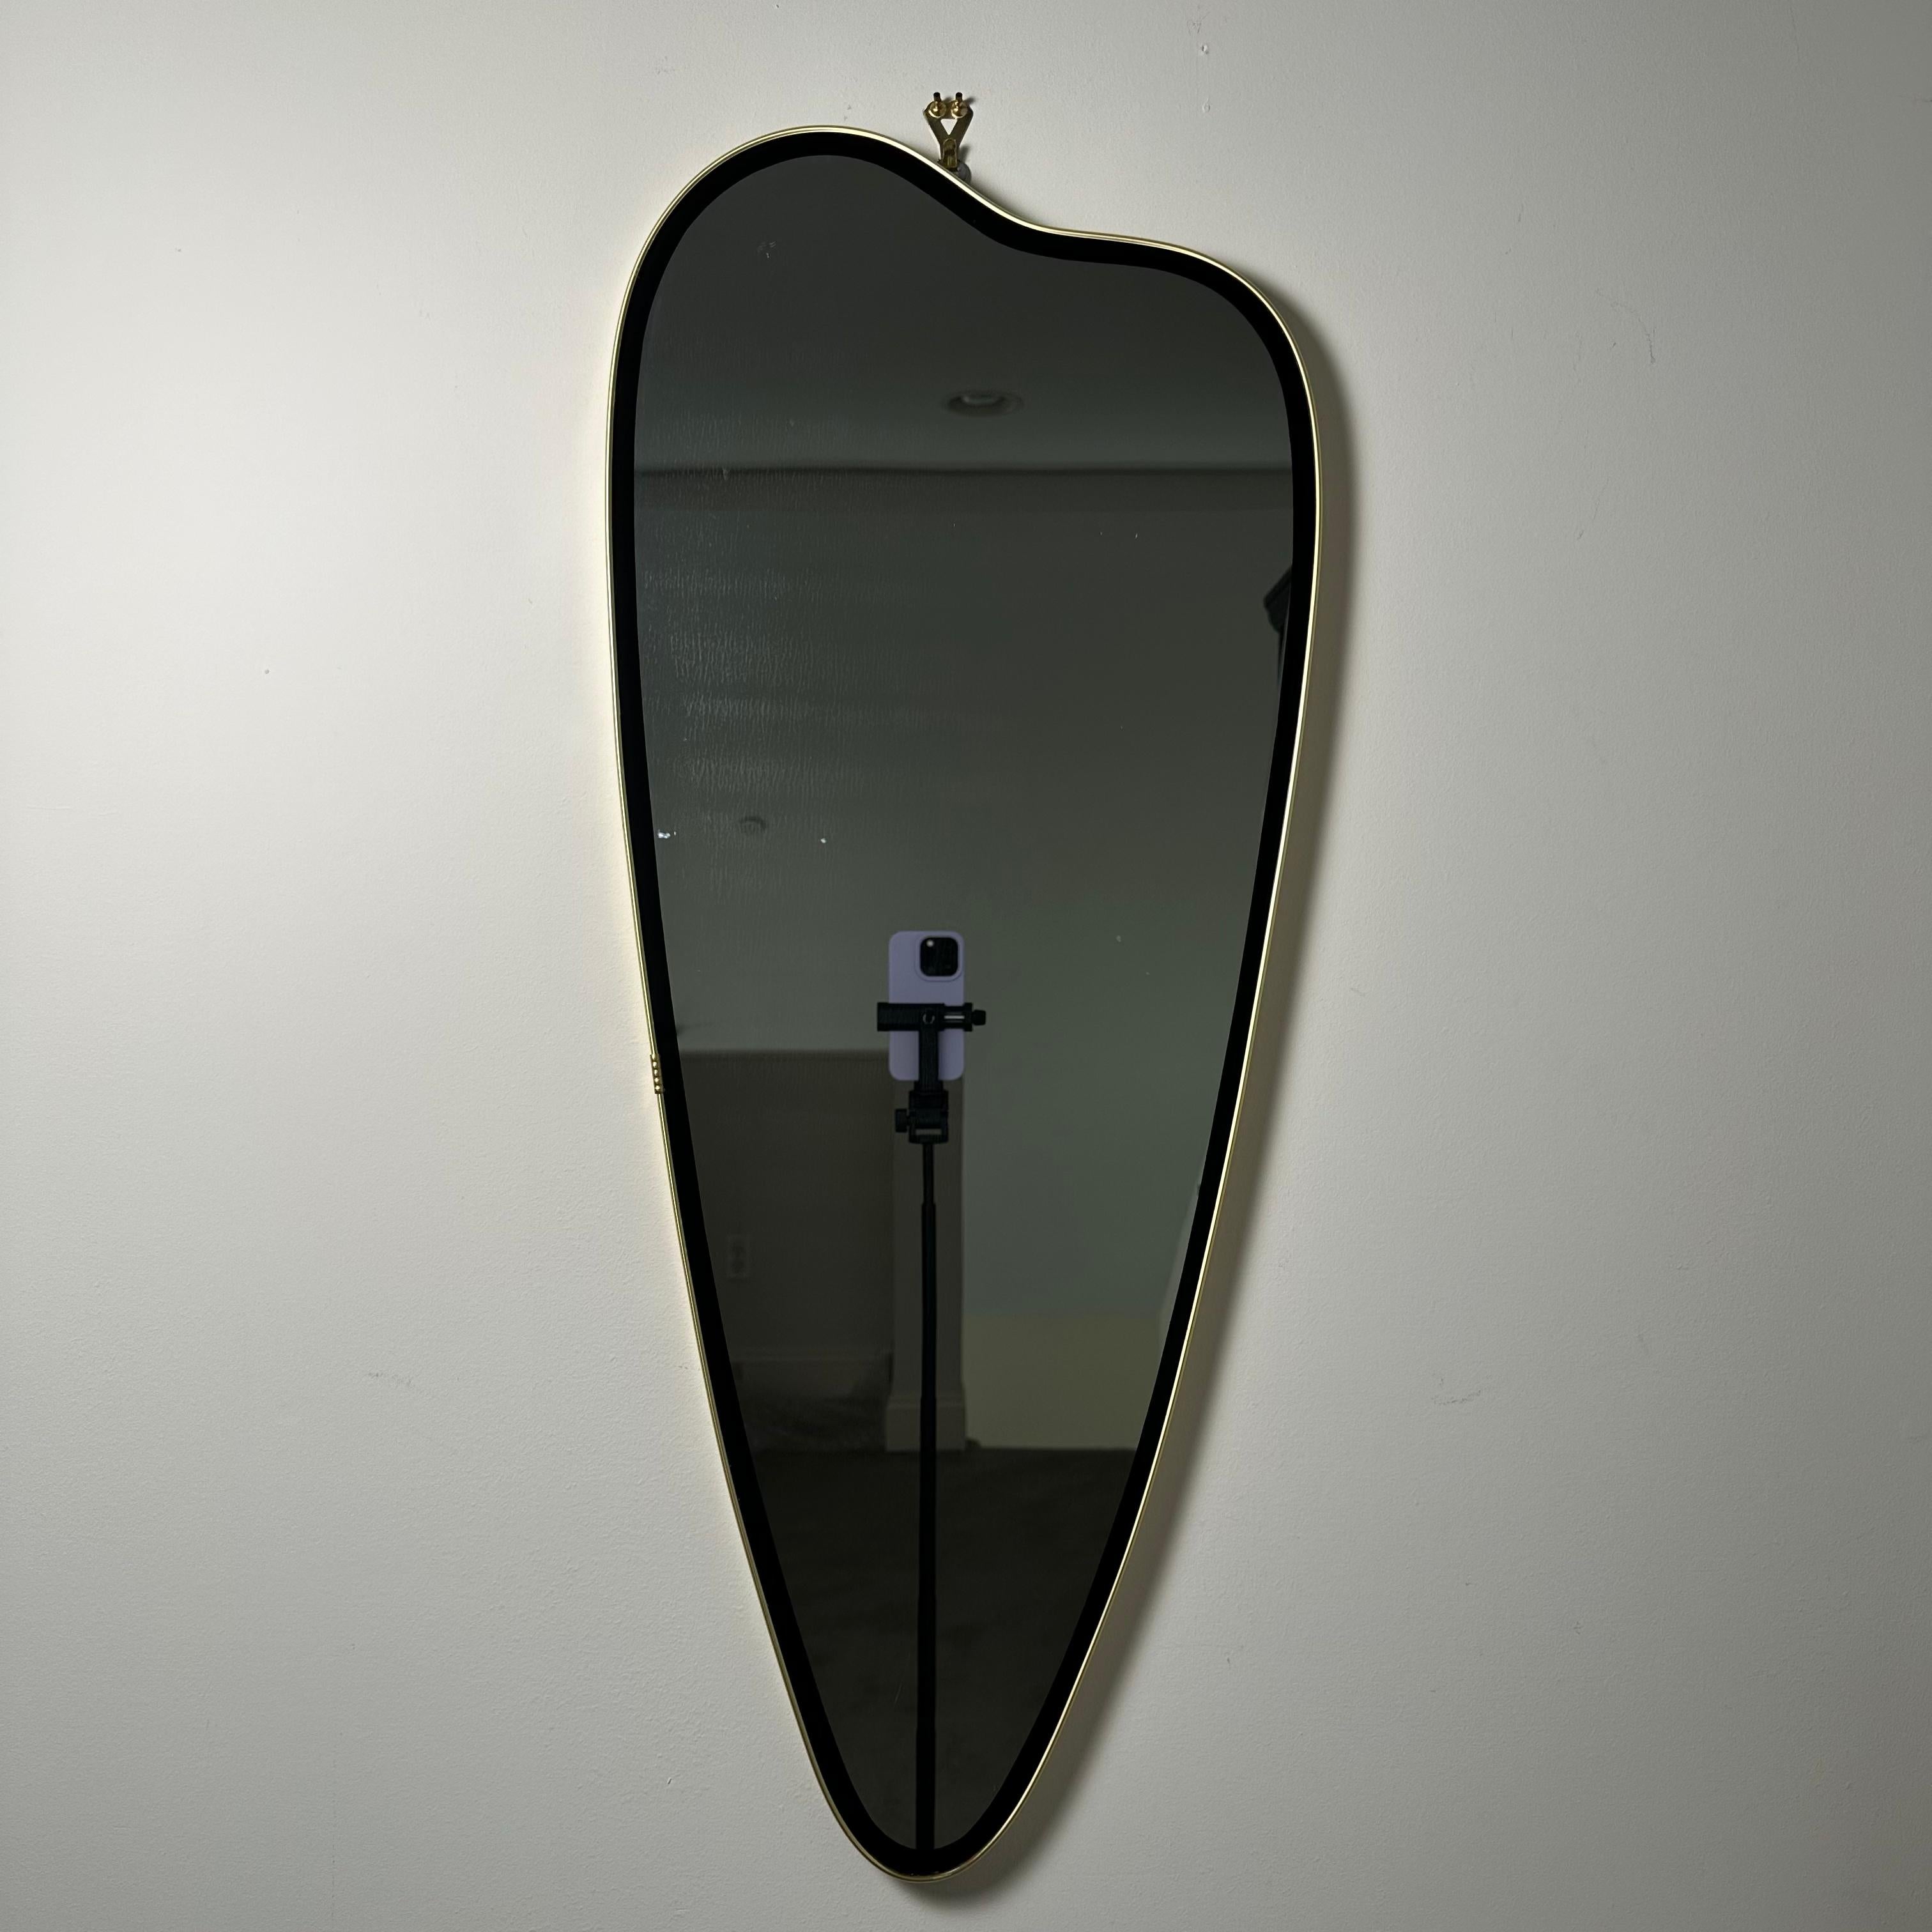 Vintage Italian Mid-Century Modern hanging wall mirror framed in brass with black reverse painted glass border. This mirror is quite large and has a freeform organic shape inspired by a painter's palette. Currently fitted with 2 hardware options for